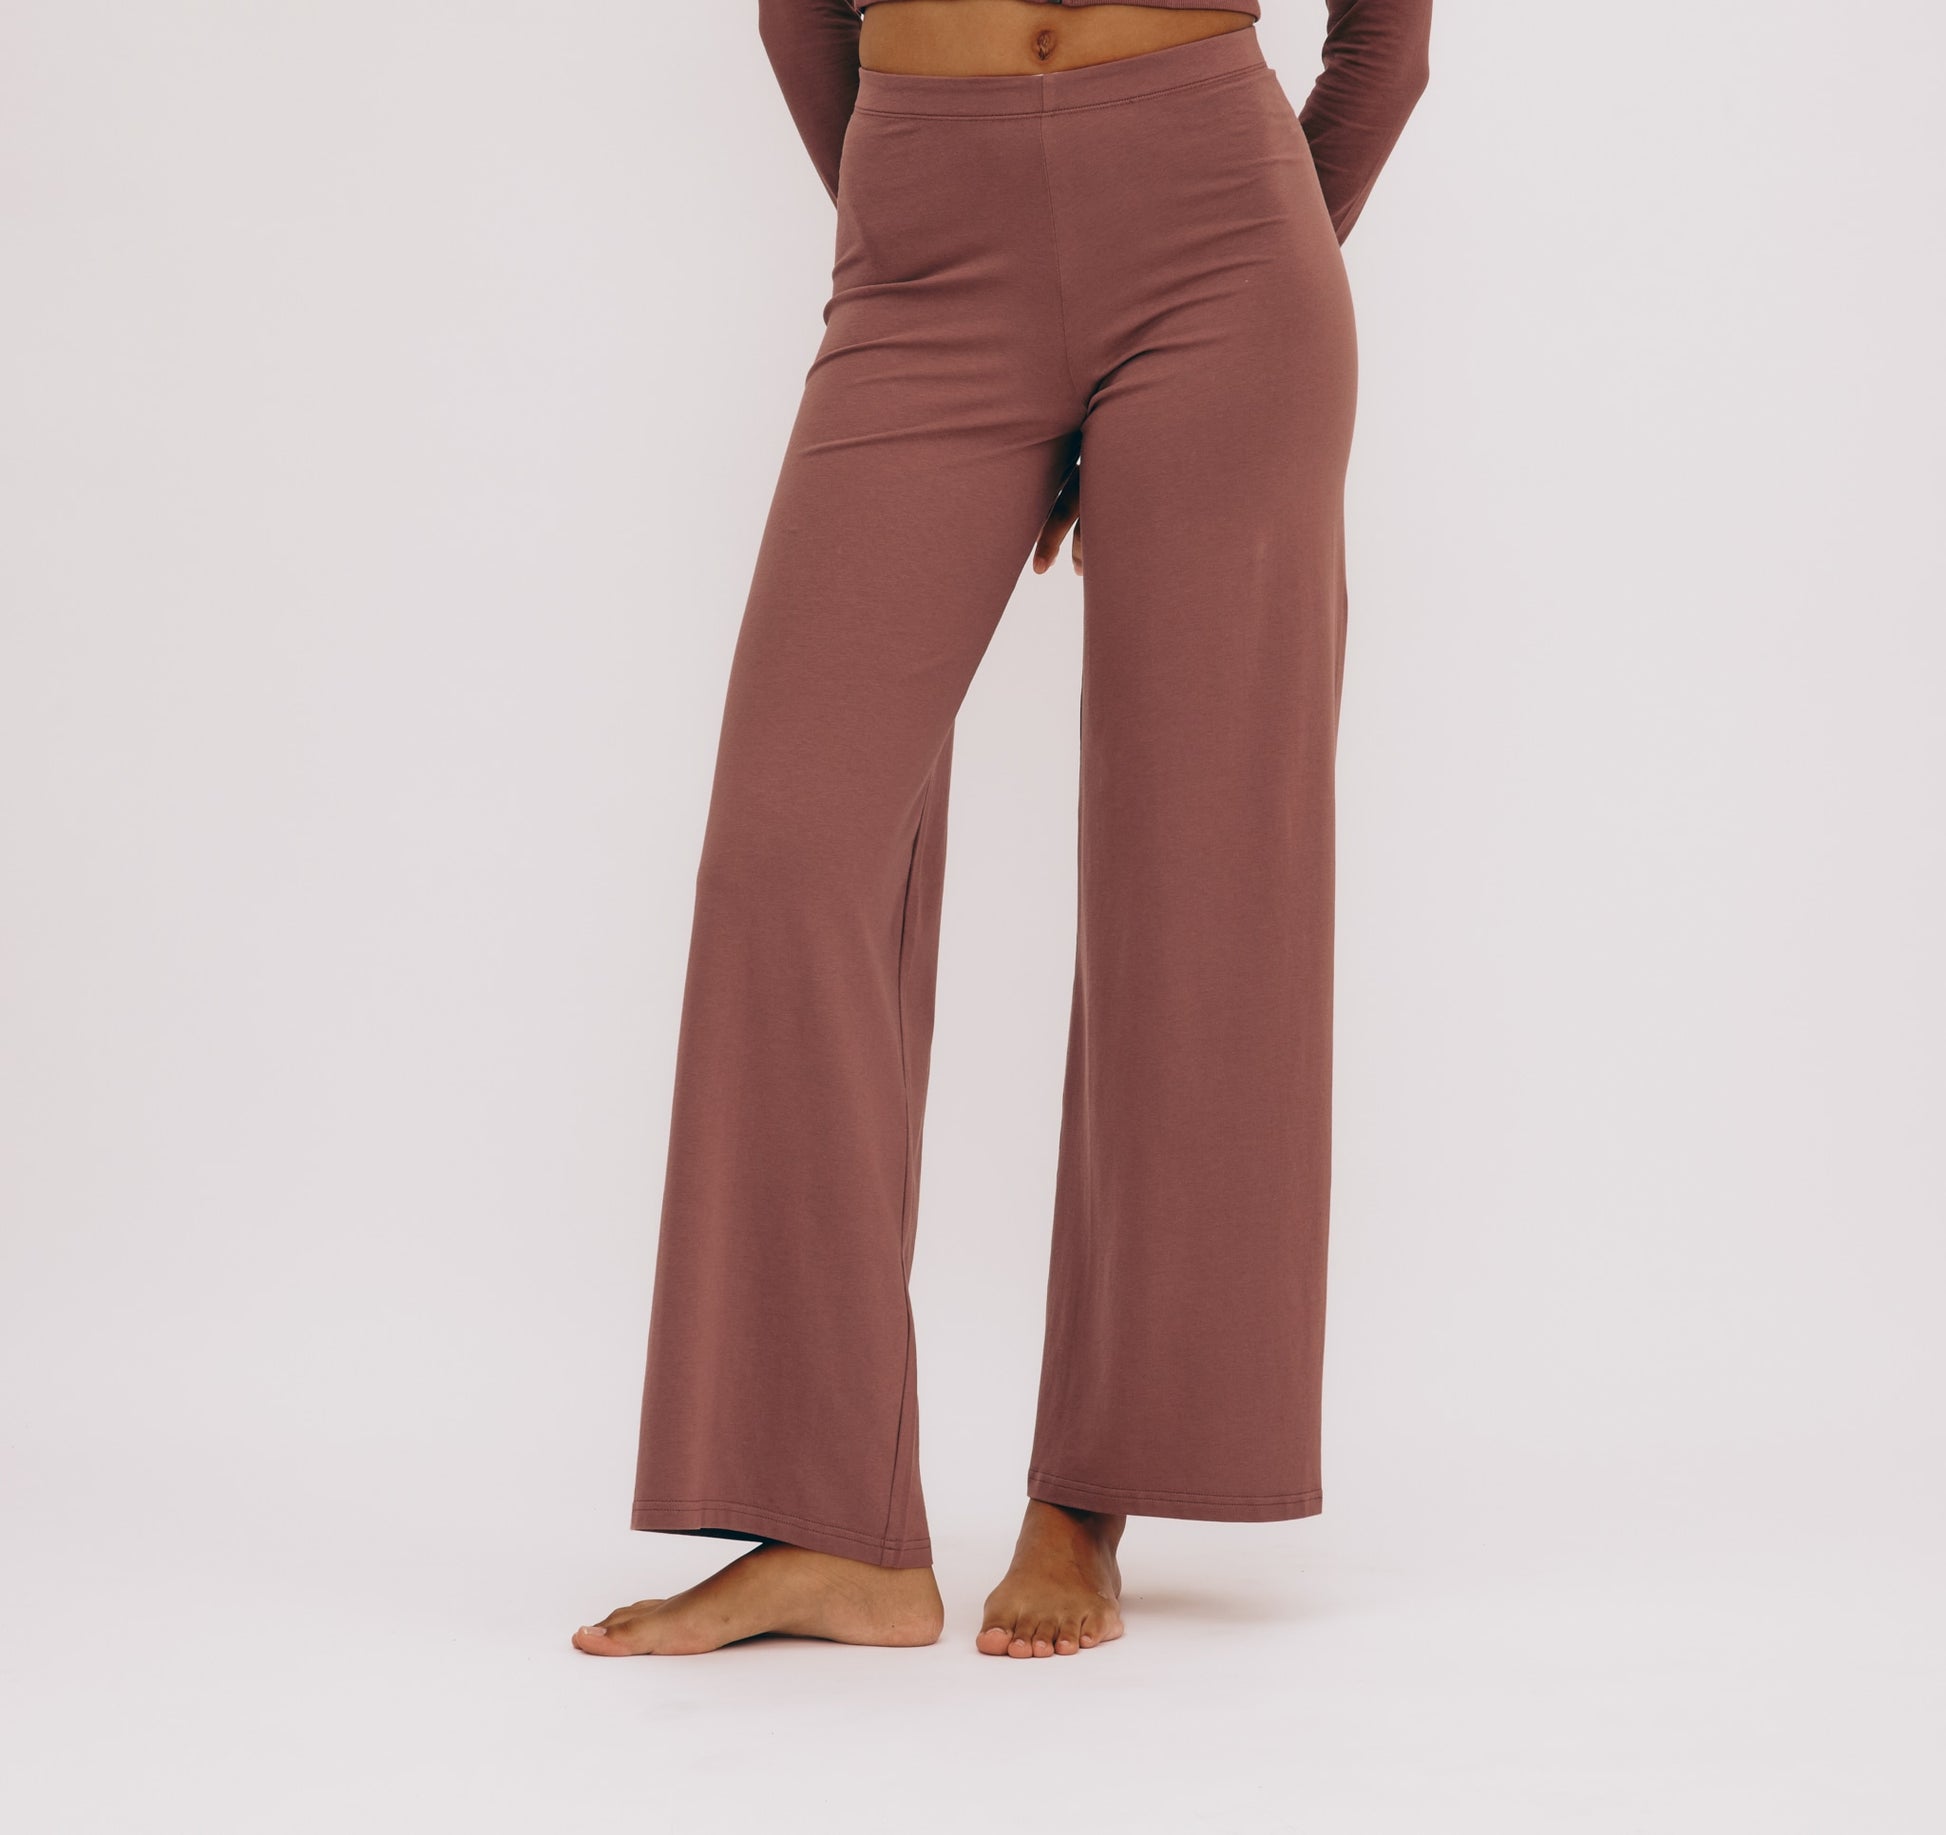 Black Organically Grown Cotton Pull-on Pant - Natural Fibres